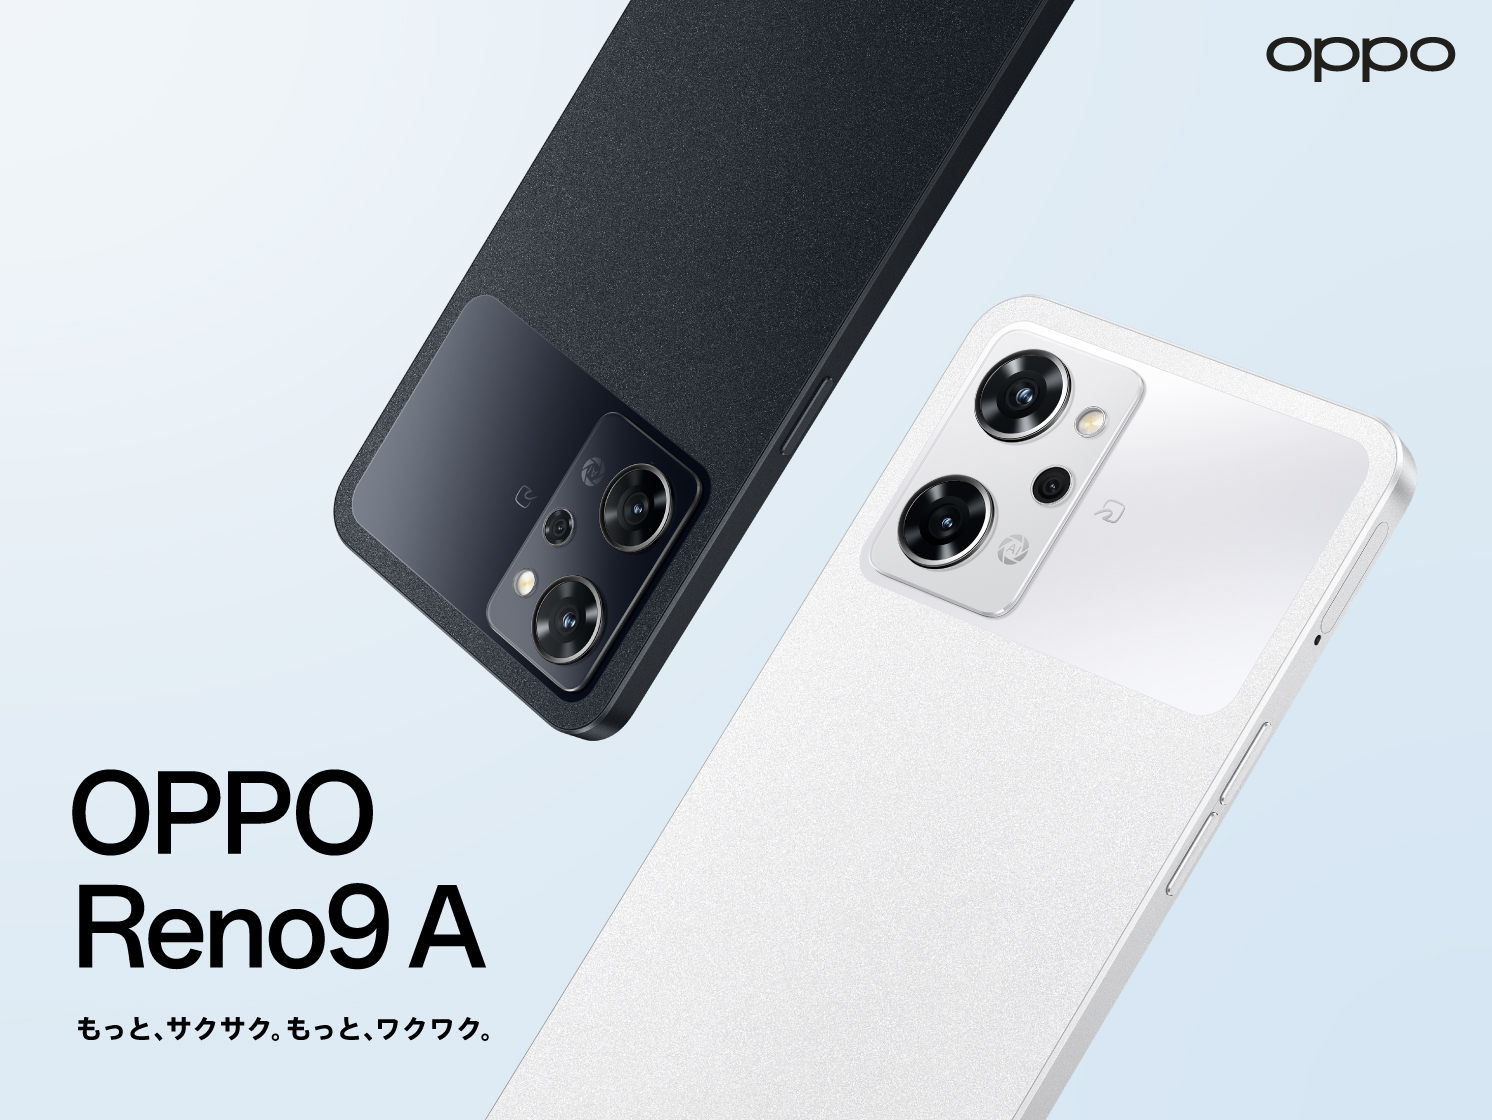 OPPO Reno9 A」発表、22日発売へ - ケータイ Watch